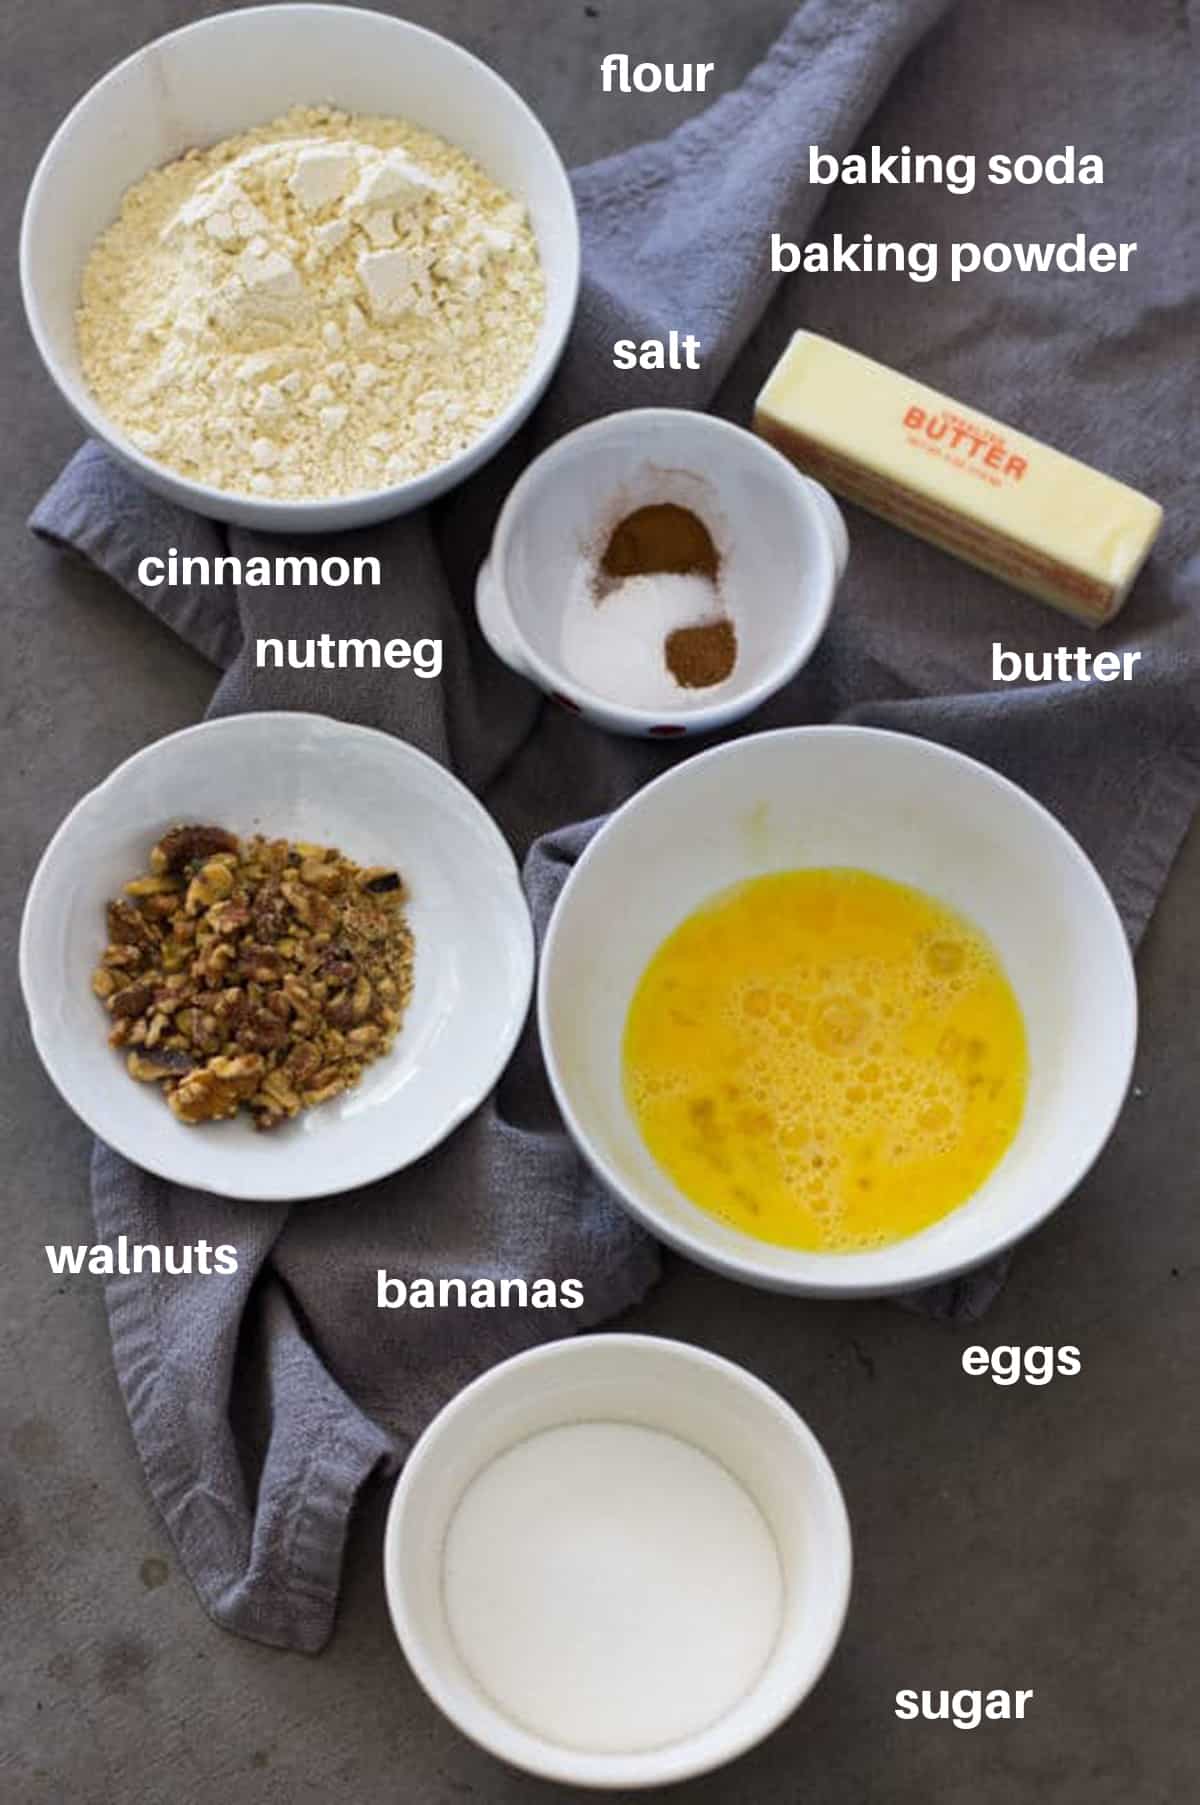 Ingredients to make banana bread, bowl of flour, eggs, butter, cinnamon, nutmeg, walnuts and sugar.